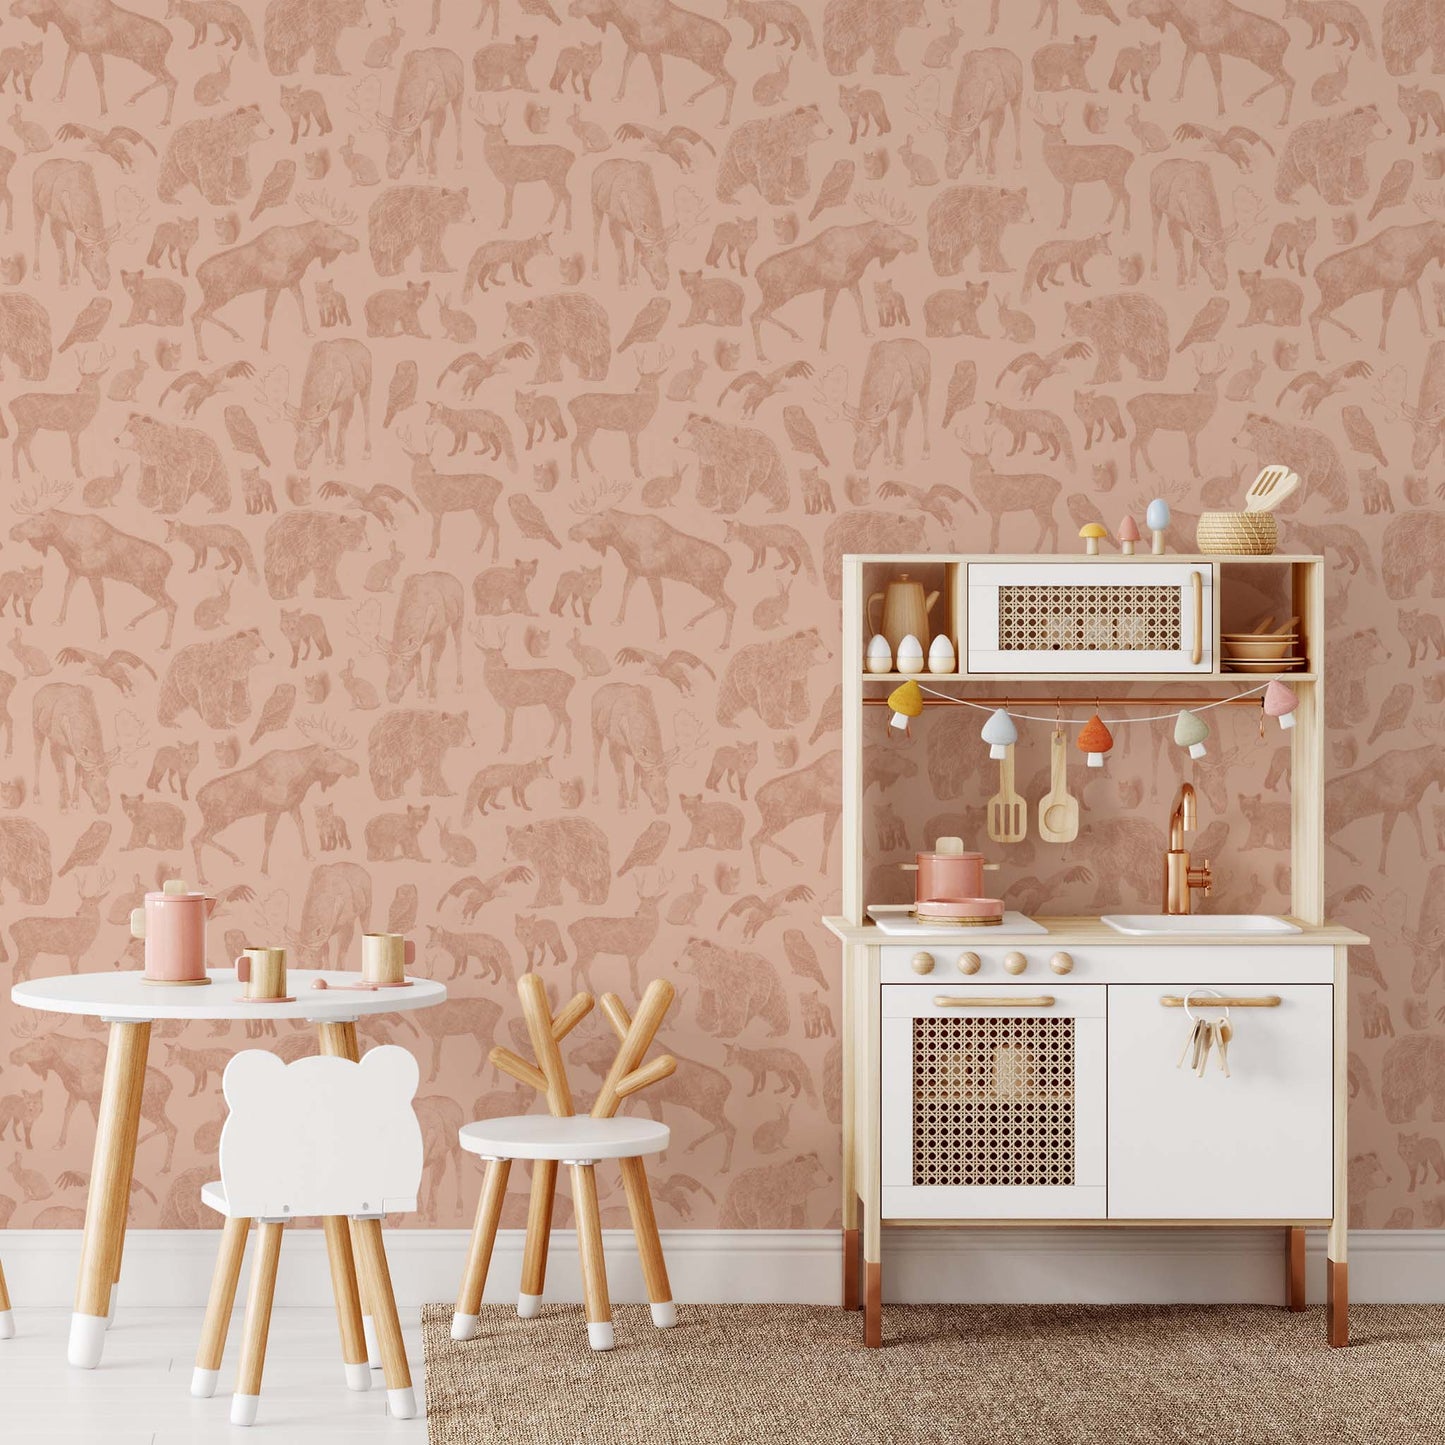 Bedroom featuring Cayla Naylor Kenai- Blush Peel and Stick Wallpaper - a nature inspired pattern